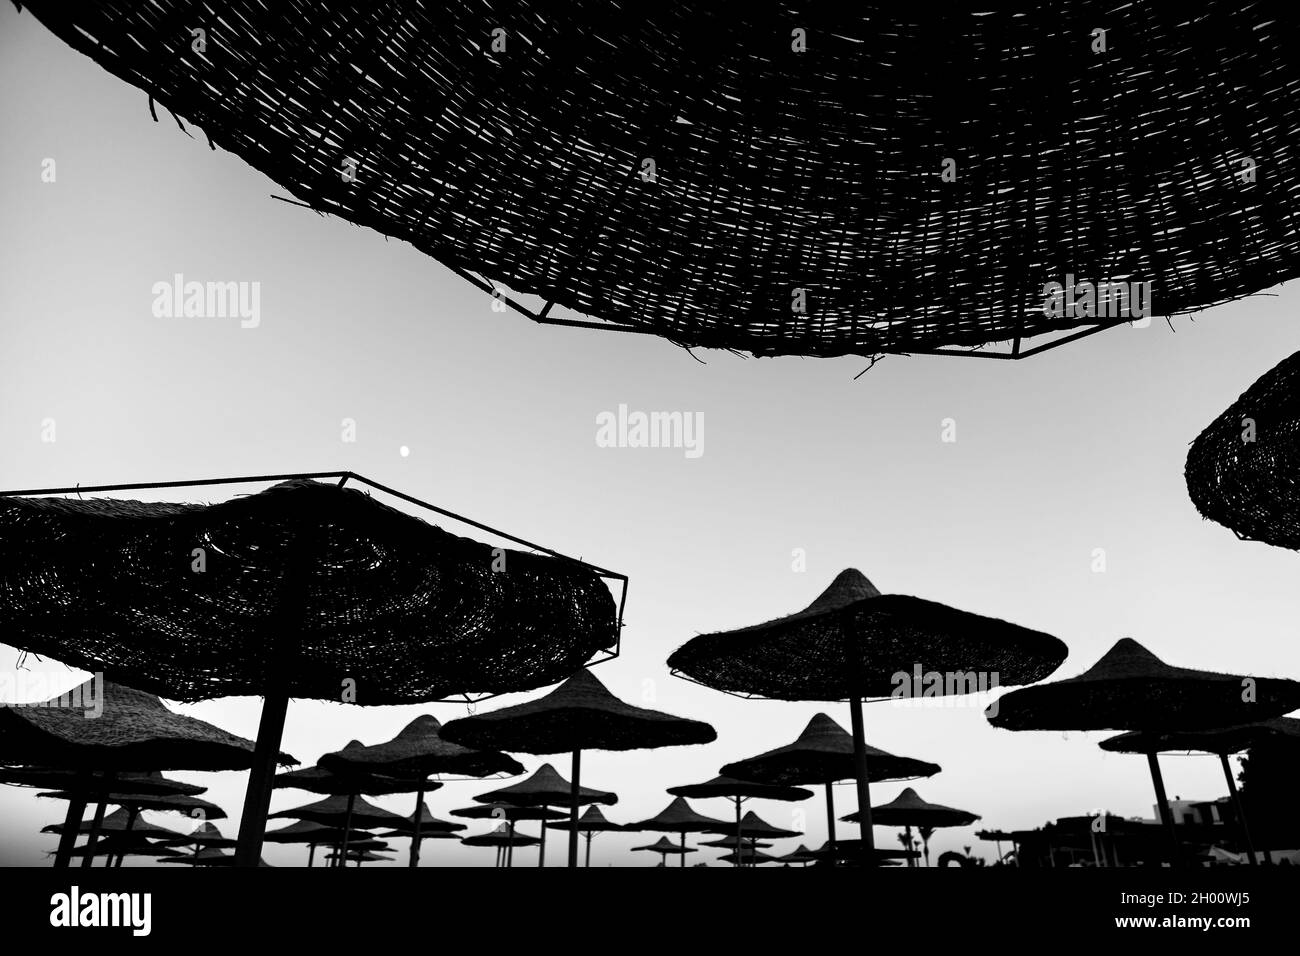 Black and white image of straw umbrellas against the sky. Travel concept. Stock Photo